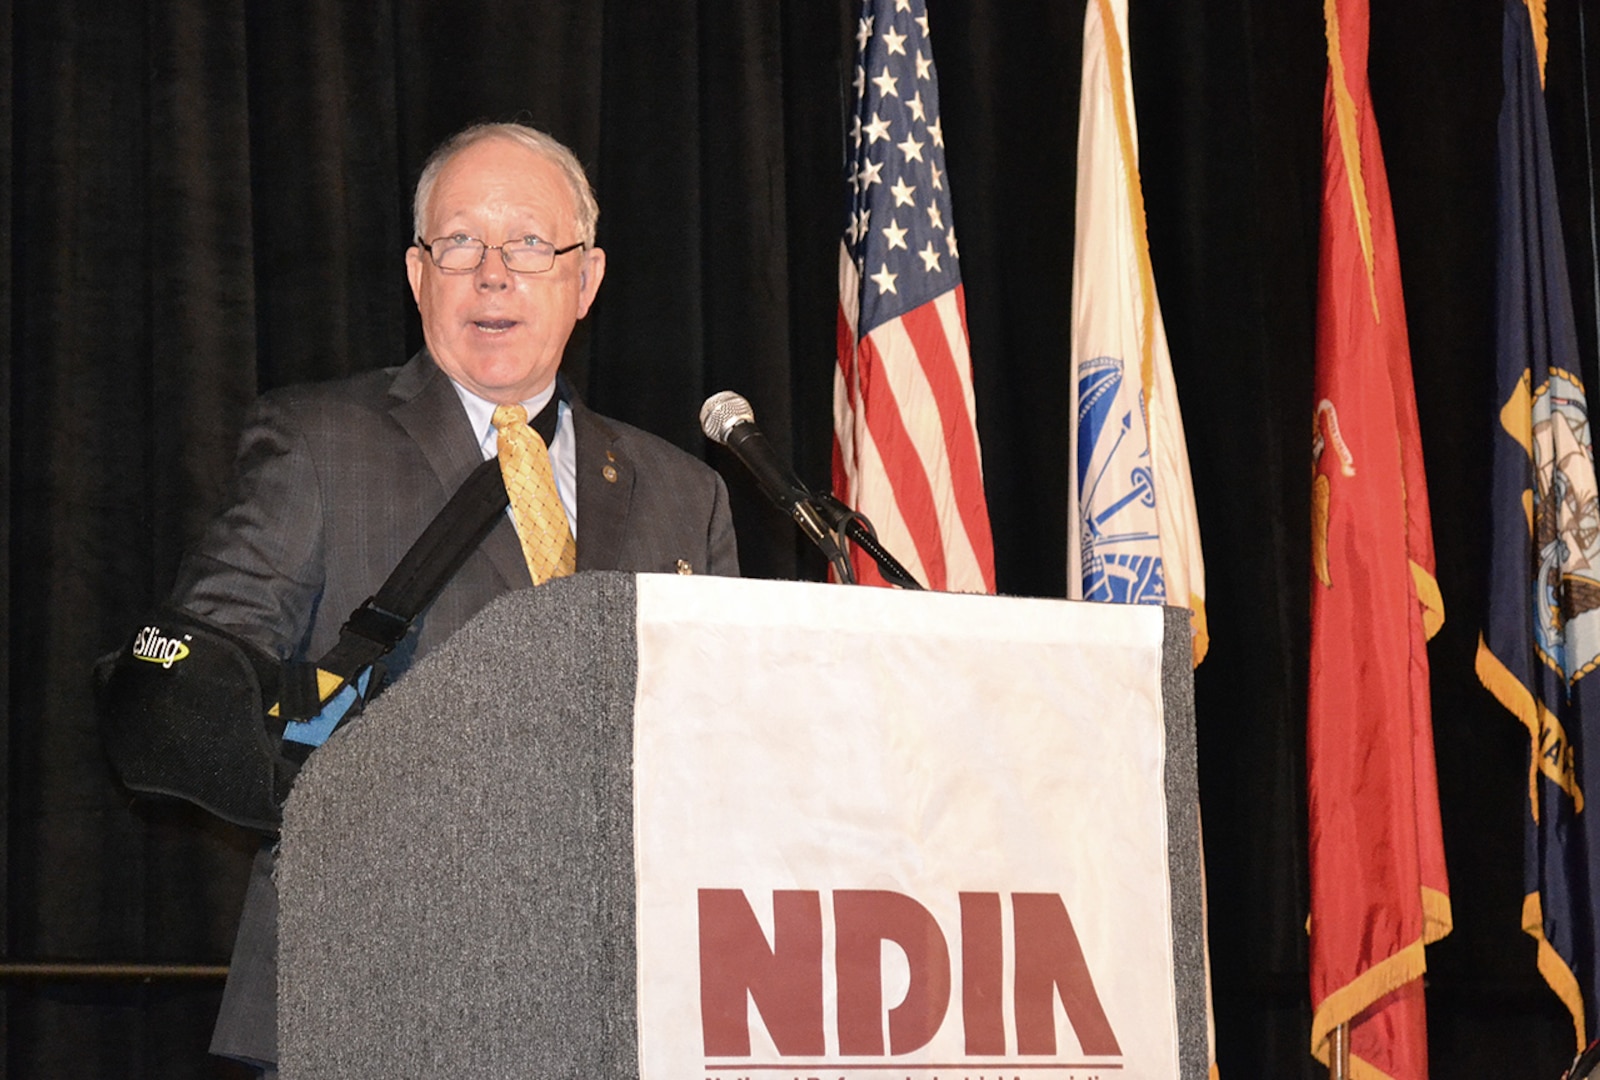 Acting DLA Land and Maritime Commander James McClaugherty describes tells industry representatives their expertise is a critical part of the agency’s ability to meet warfighters’ needs Aug. 30 during the DLA Land and Maritime Supplier Conference and Expo in Columbus, Ohio.